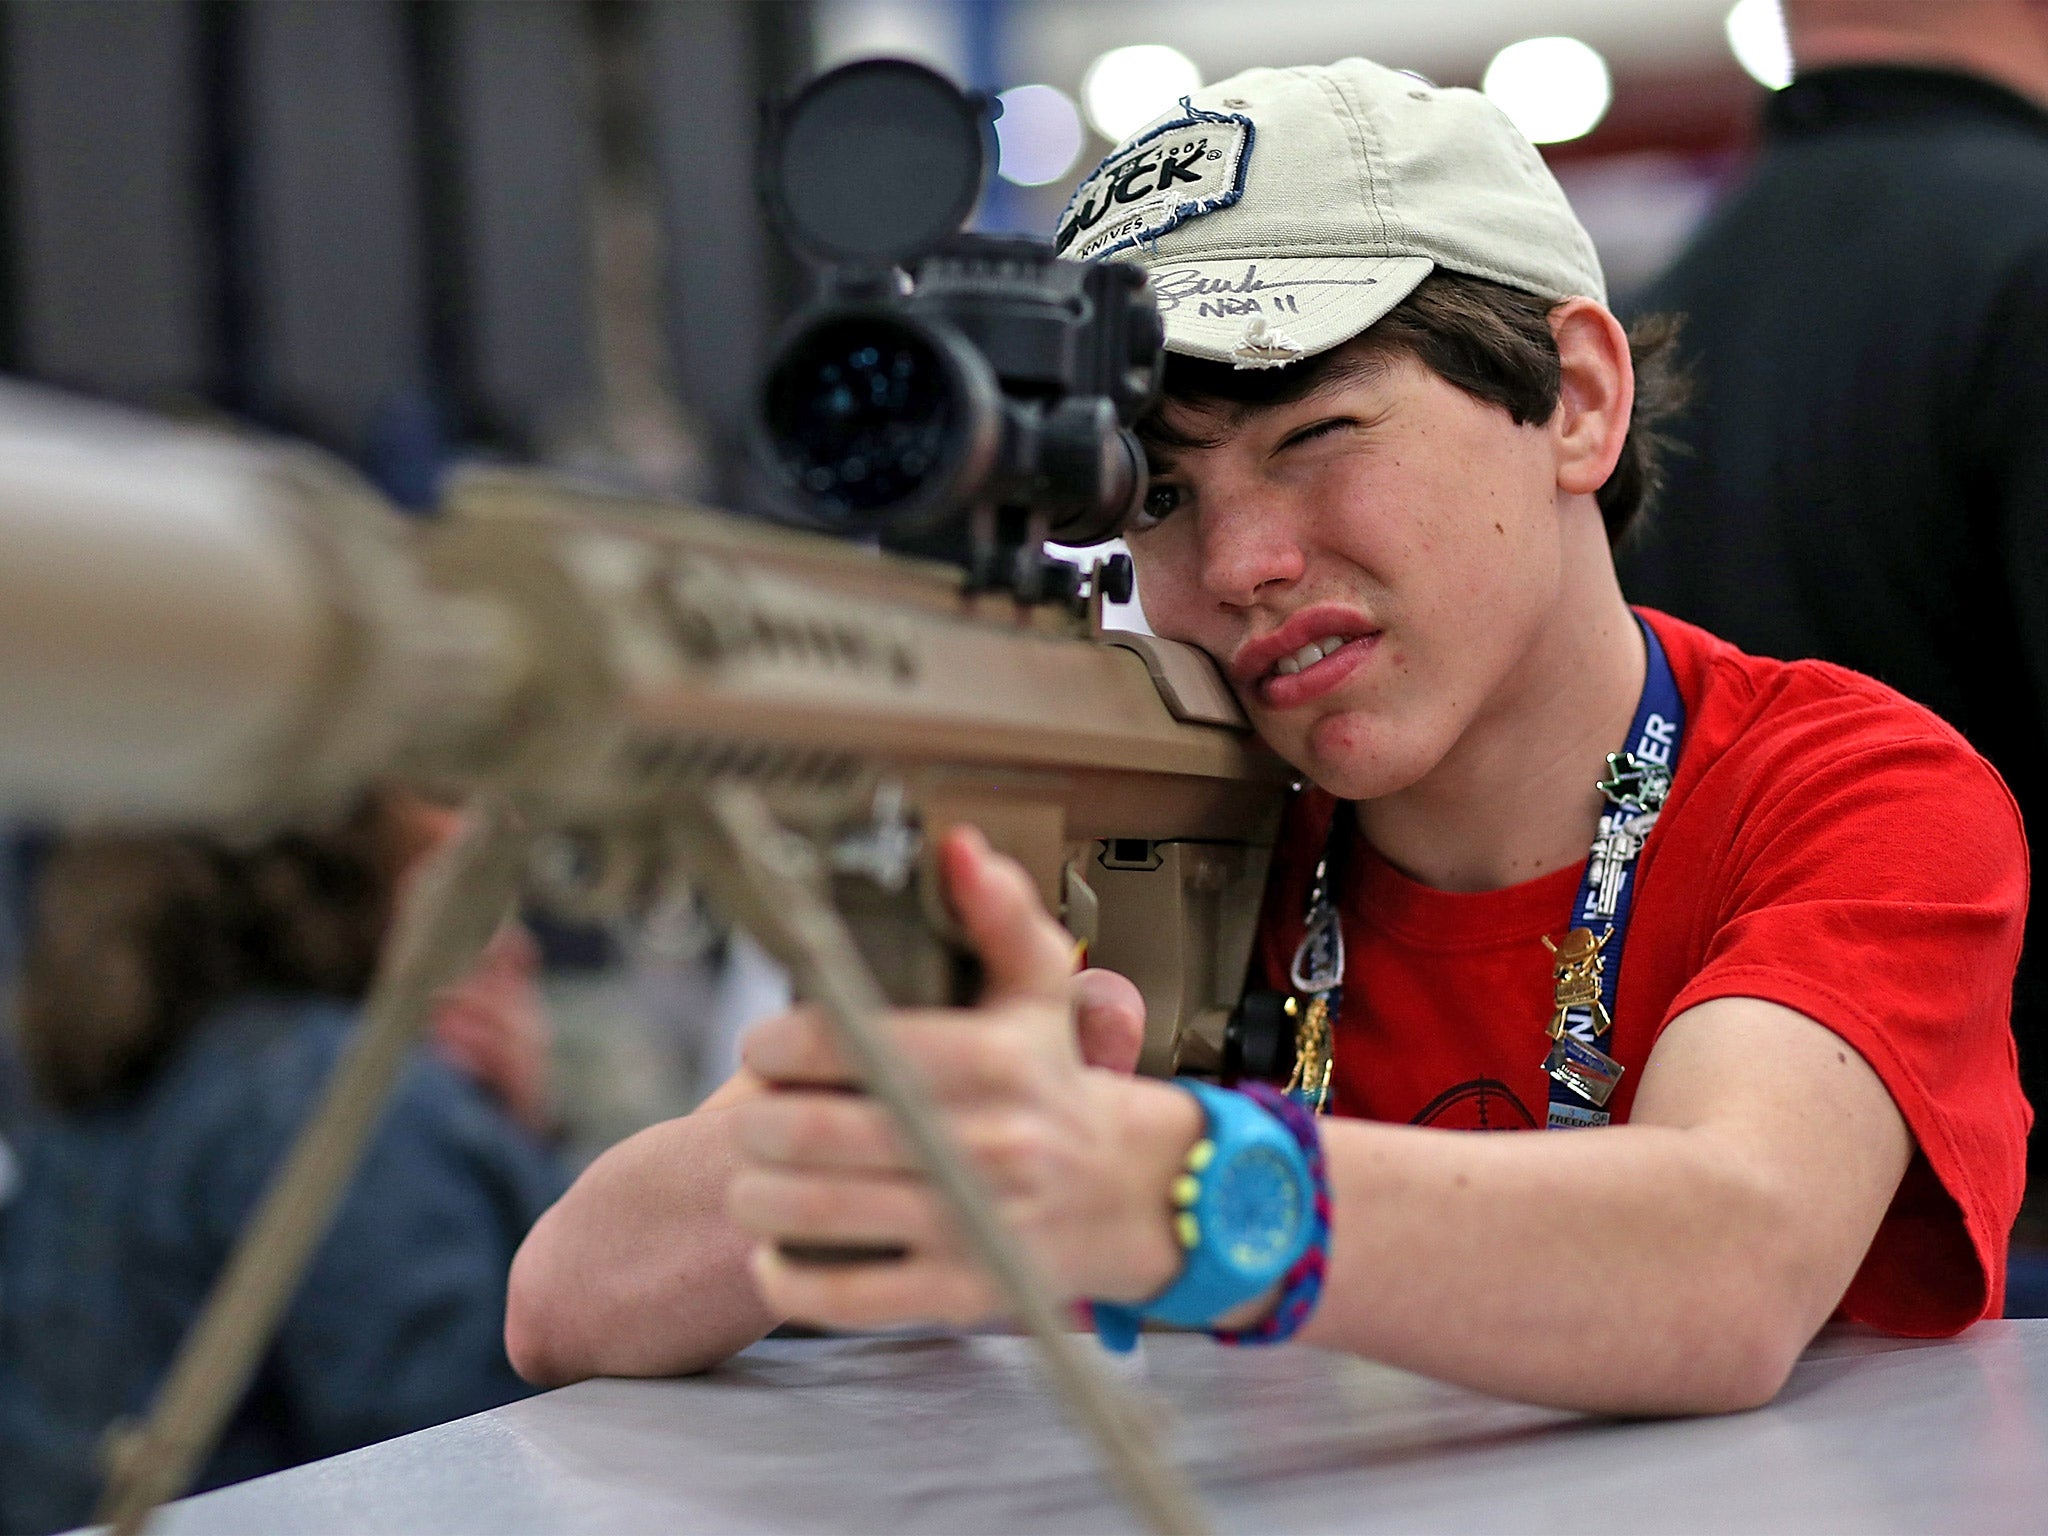 A young boy inspects a high-power sniper rifle at the 2013 NRA annual show